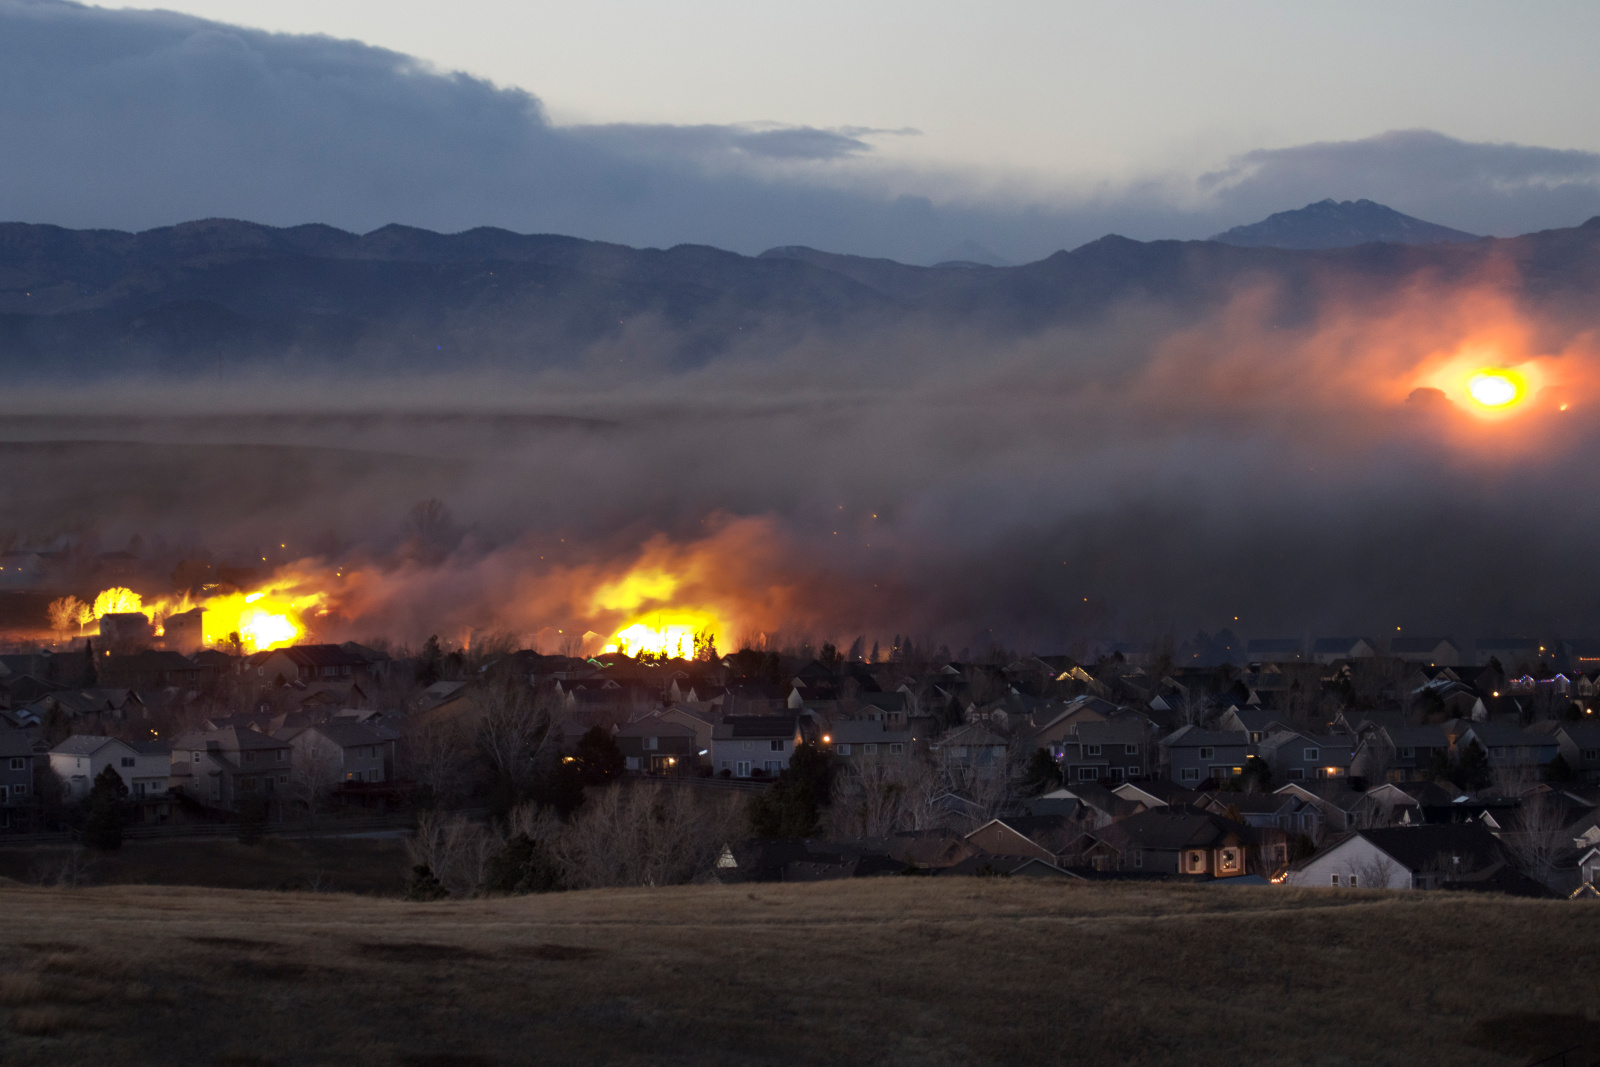 Photo of fires burning in the brush behind homes in a mountainous area